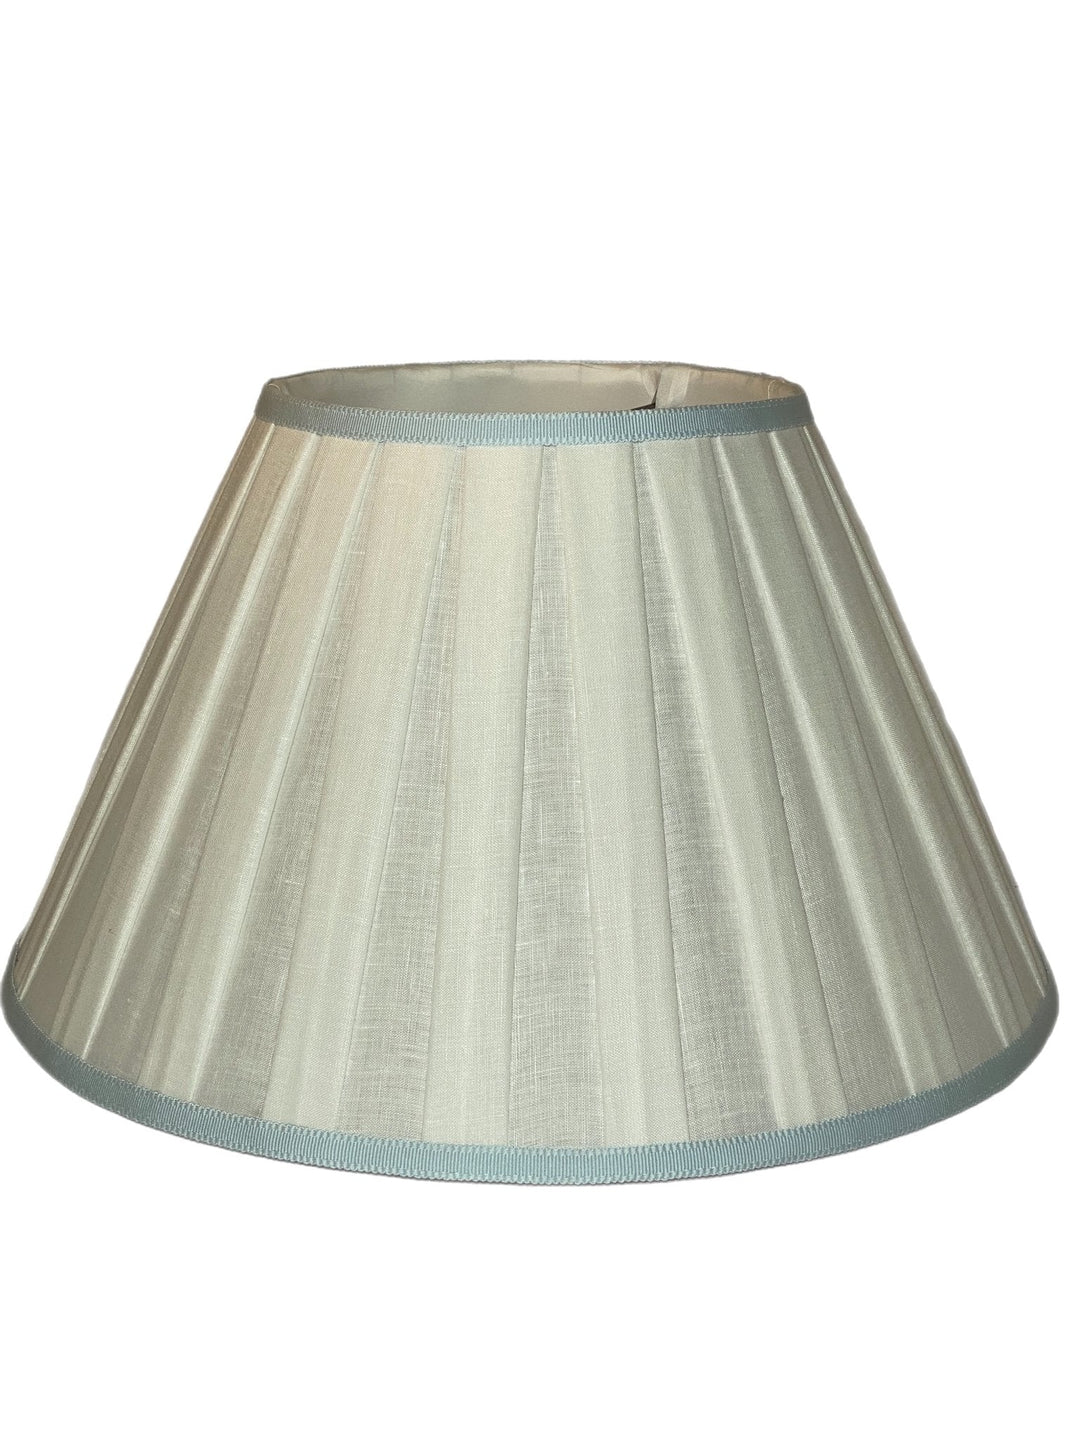 Box Pleat Linen Empire Lamp Shade + Accent Trim - Lux Lamp Shades